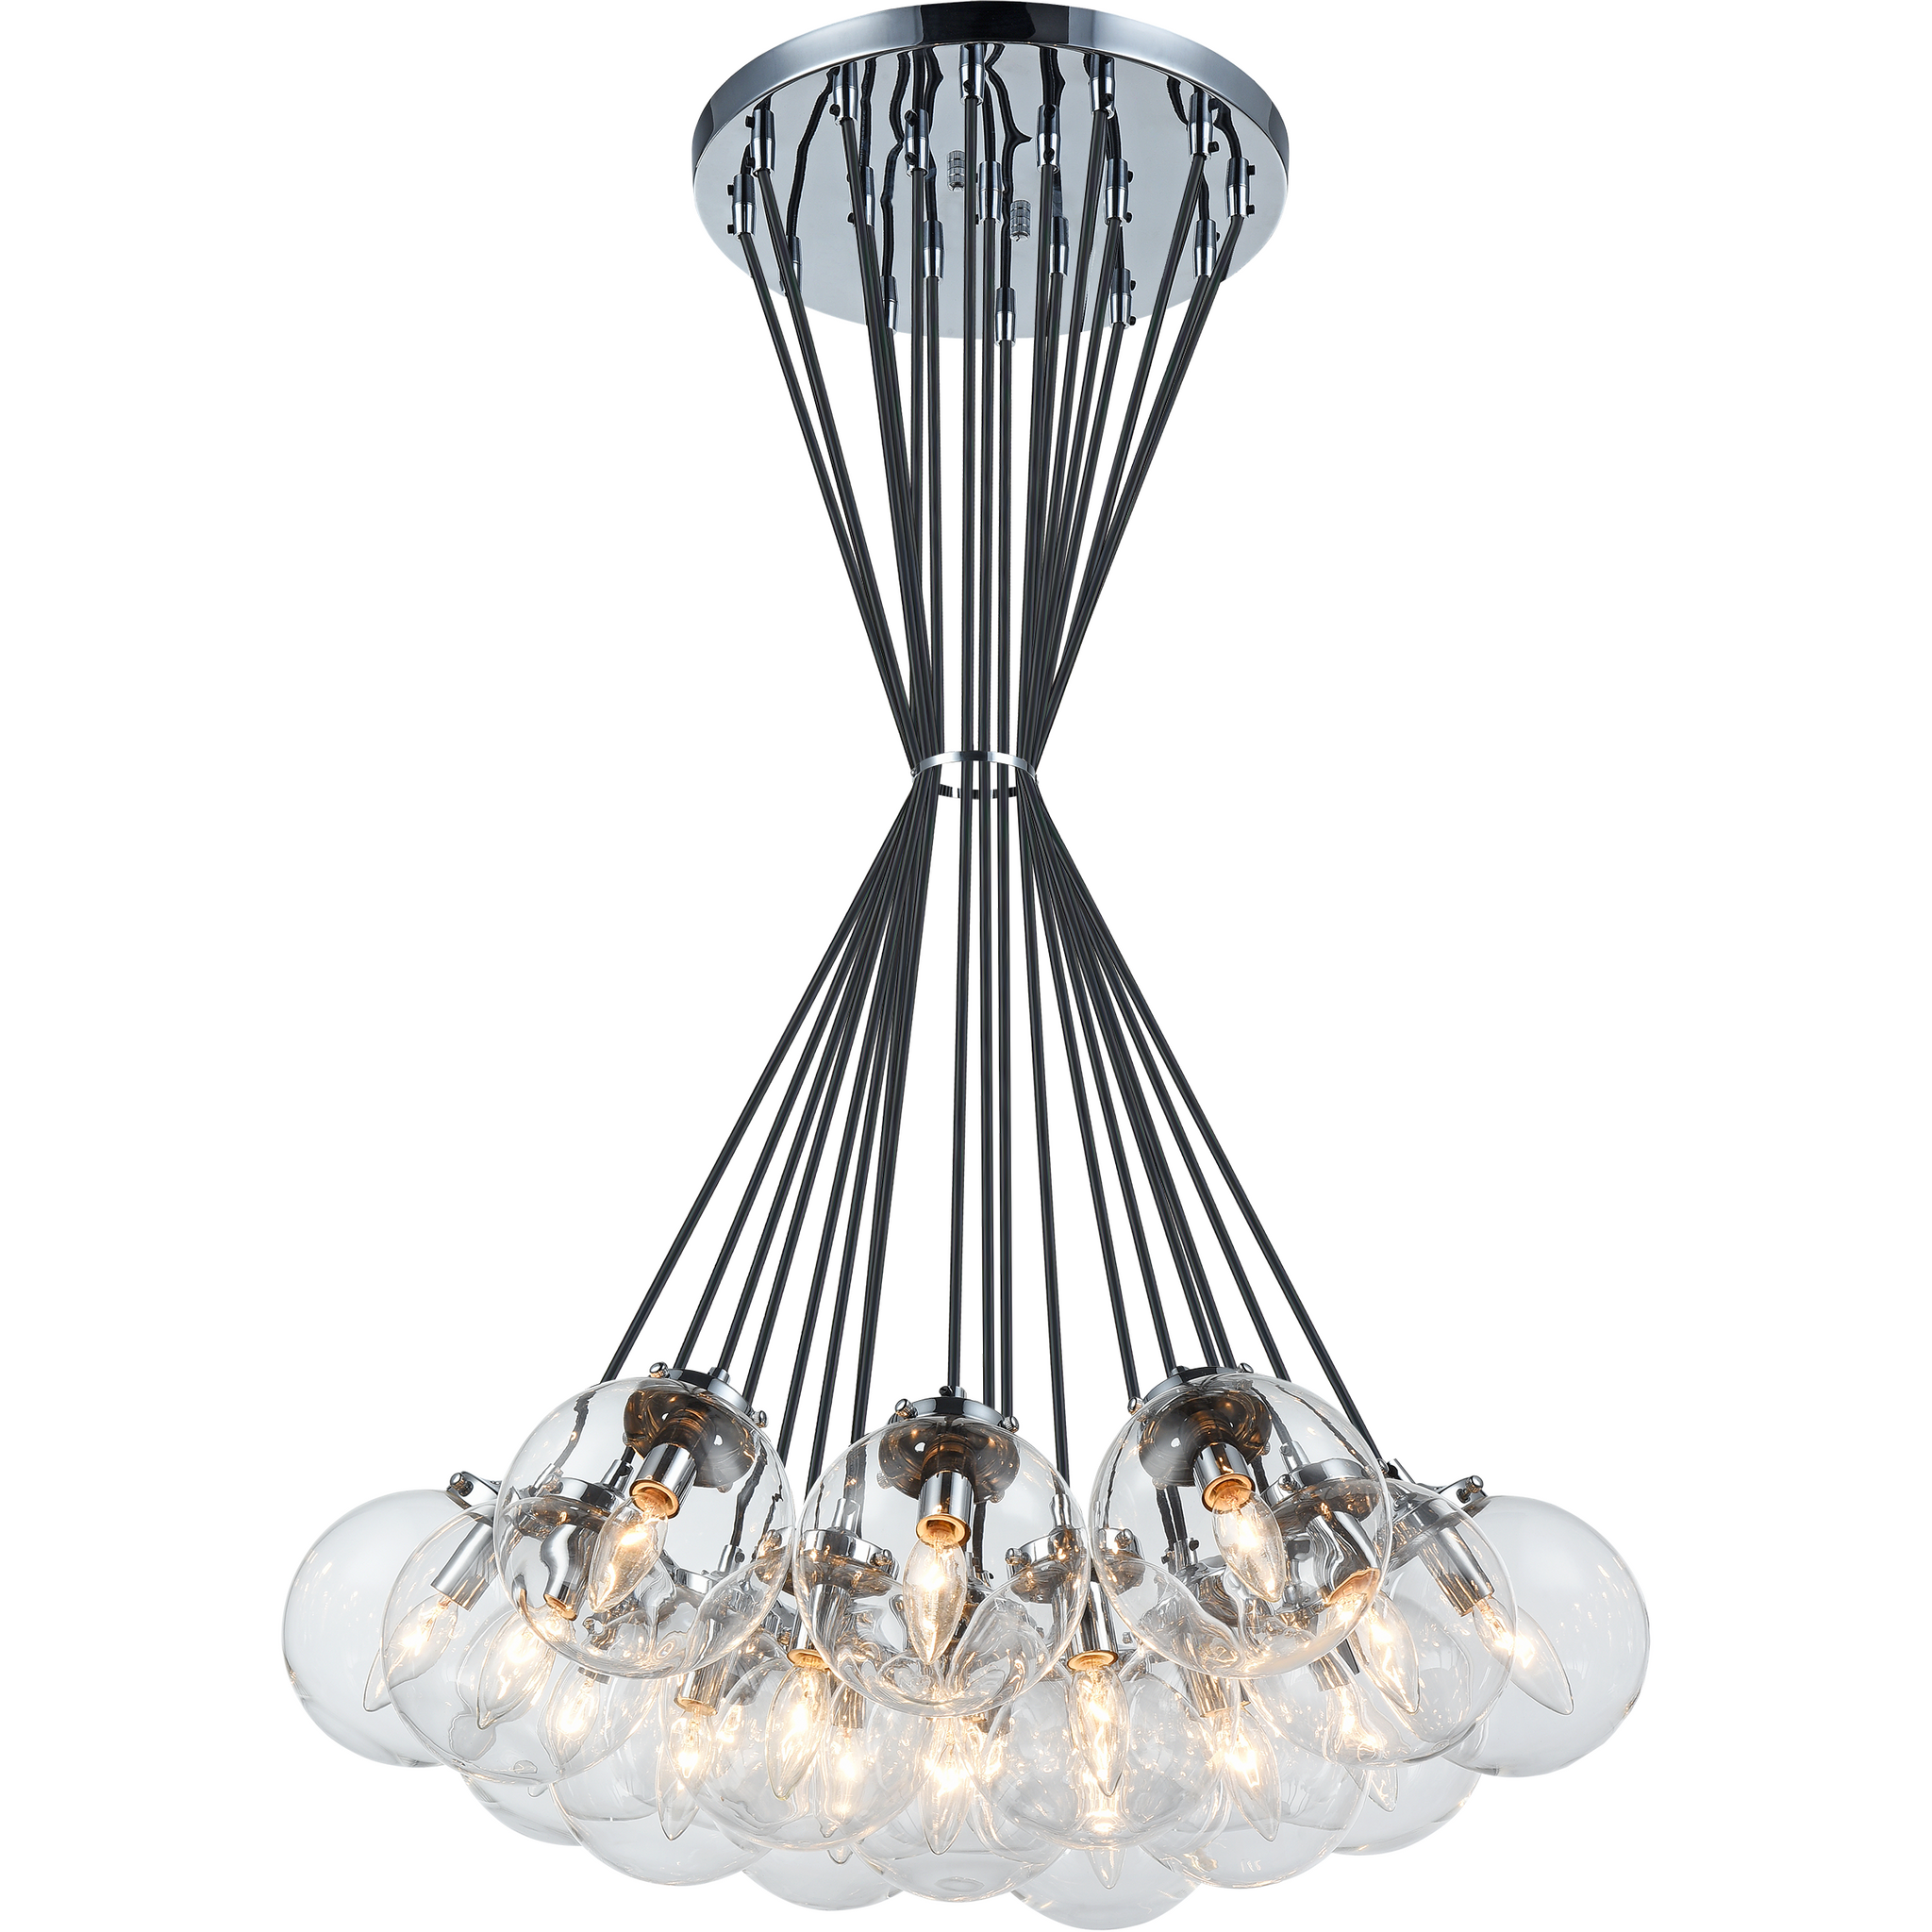 The Bougie Chandelier Chrome CL